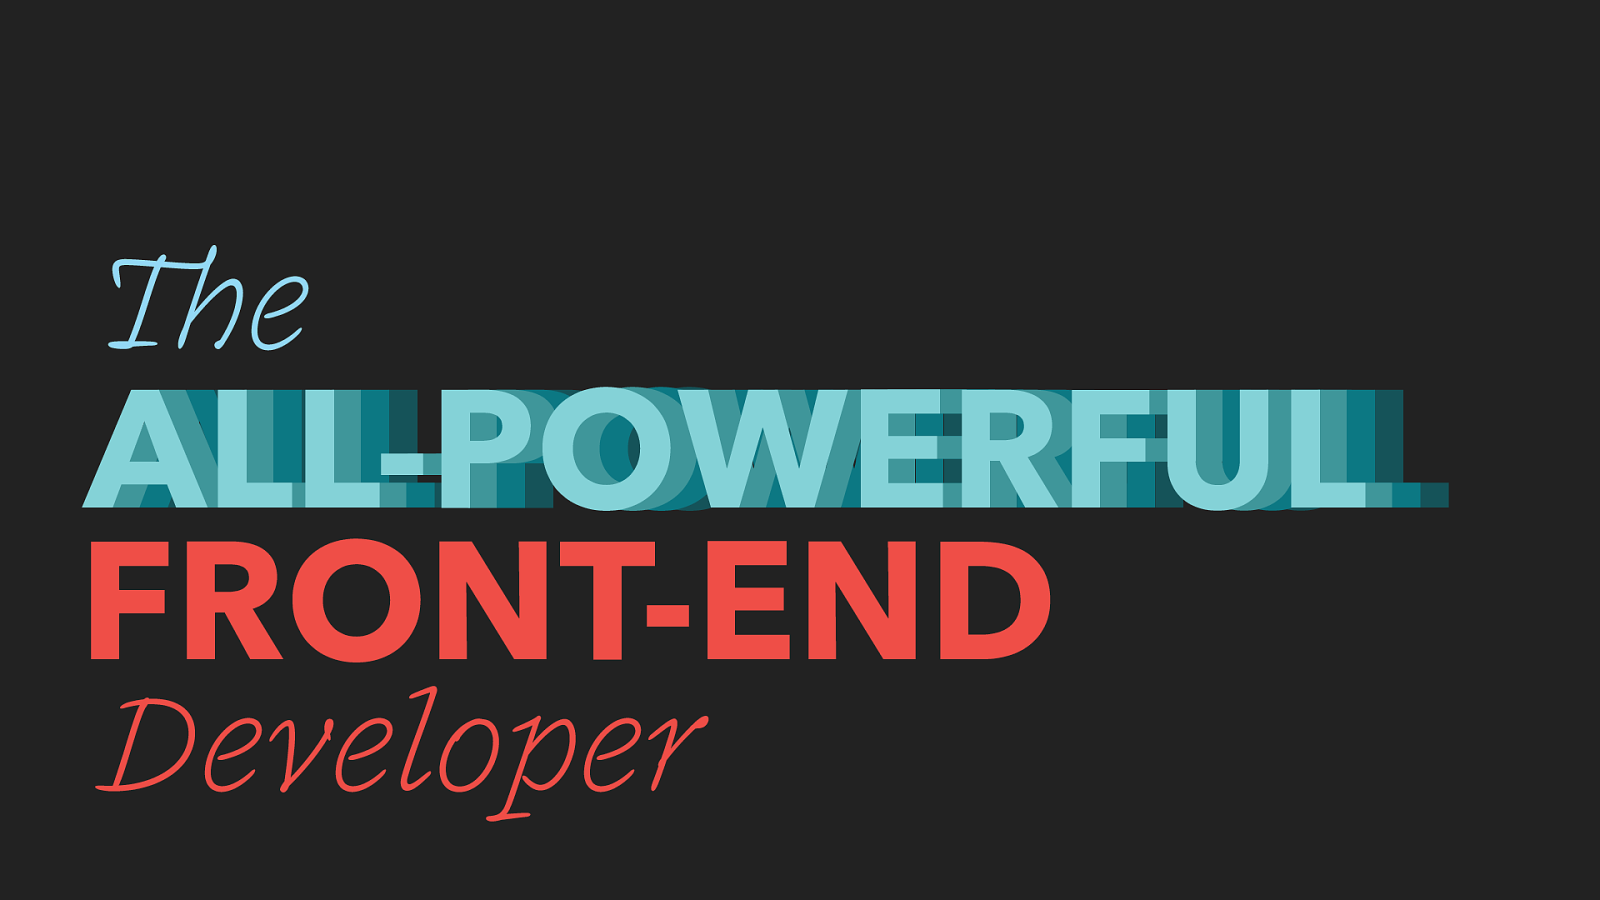 The All Powerful Front End Developer